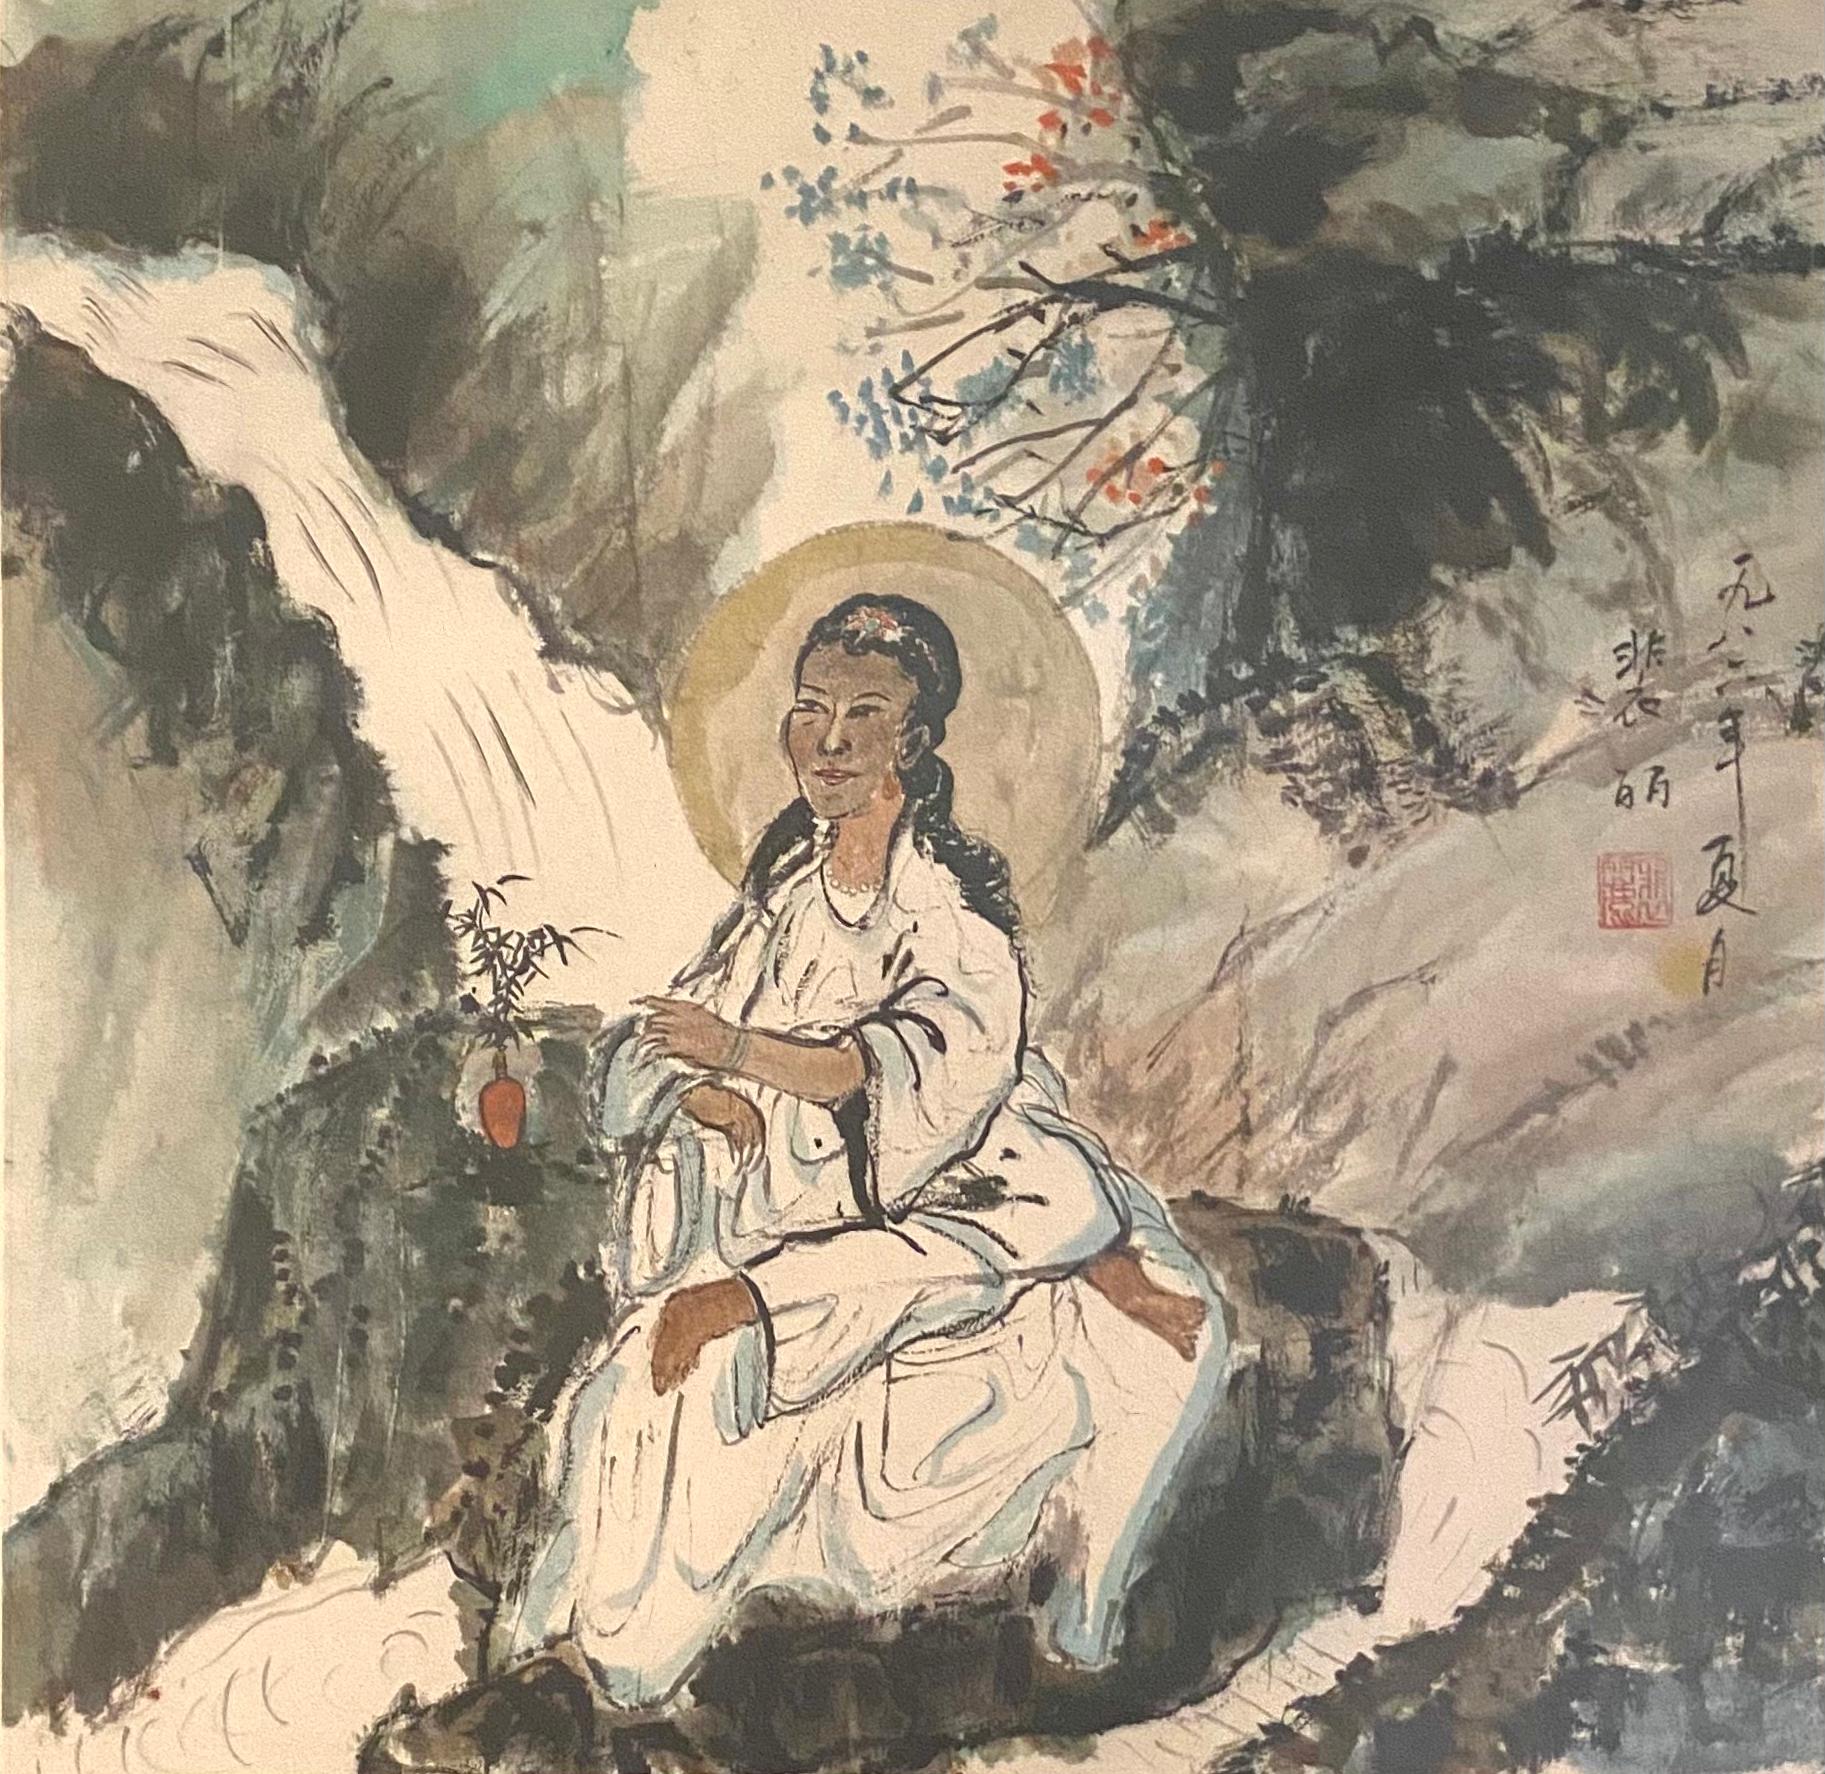 Goddess contemporary Chinese ink and brush painting by Fereshteh Stoecklein